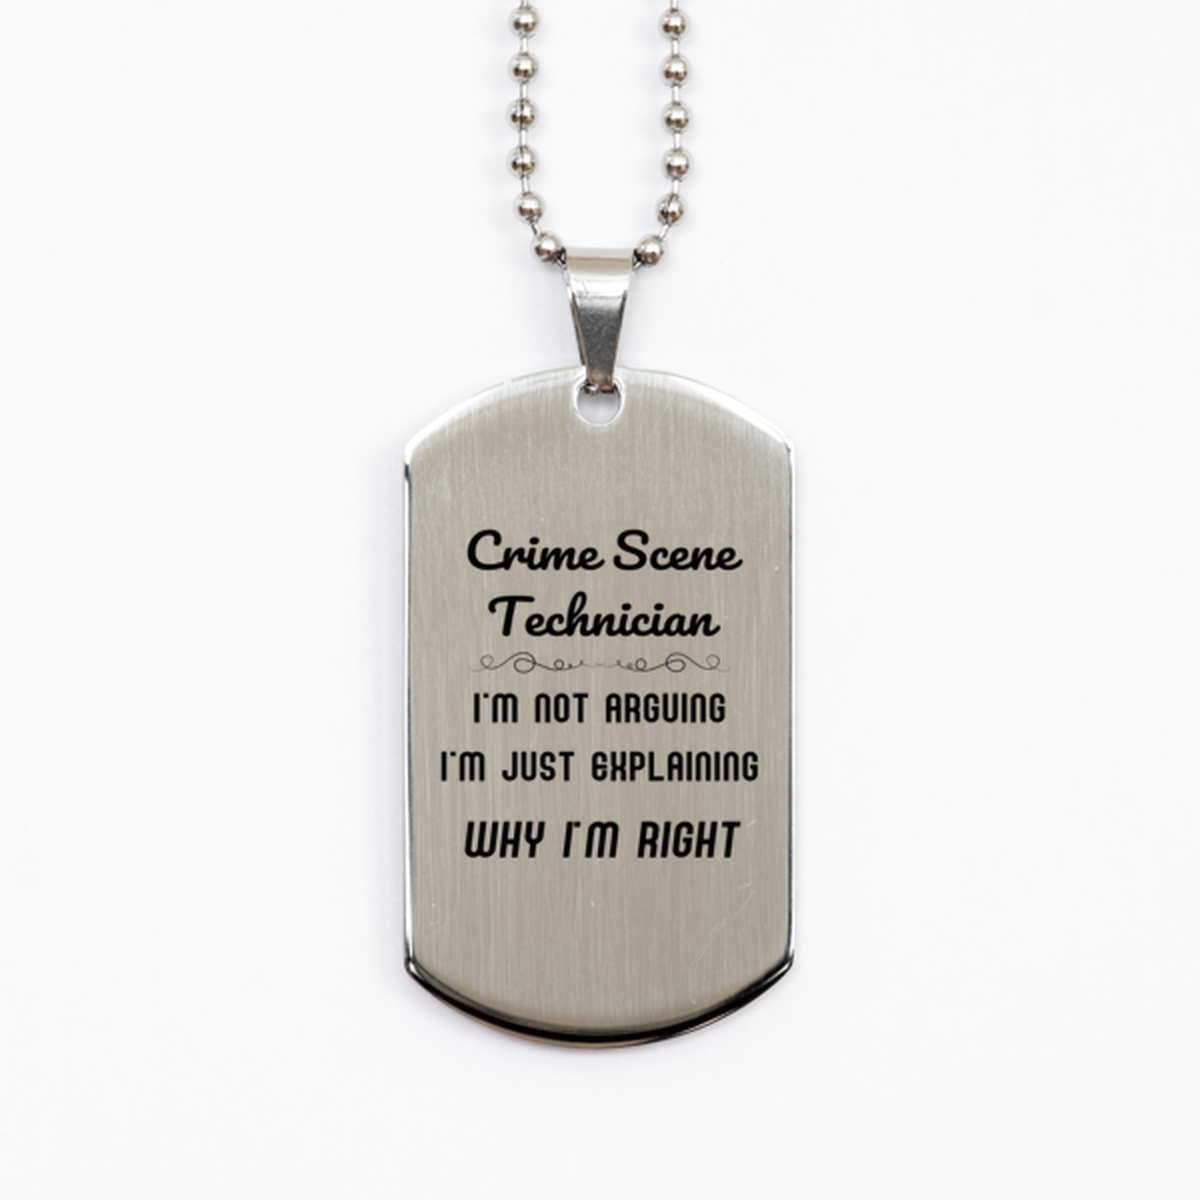 Crime Scene Technician I'm not Arguing. I'm Just Explaining Why I'm RIGHT Silver Dog Tag, Funny Saying Quote Crime Scene Technician Gifts For Crime Scene Technician Graduation Birthday Christmas Gifts for Men Women Coworker